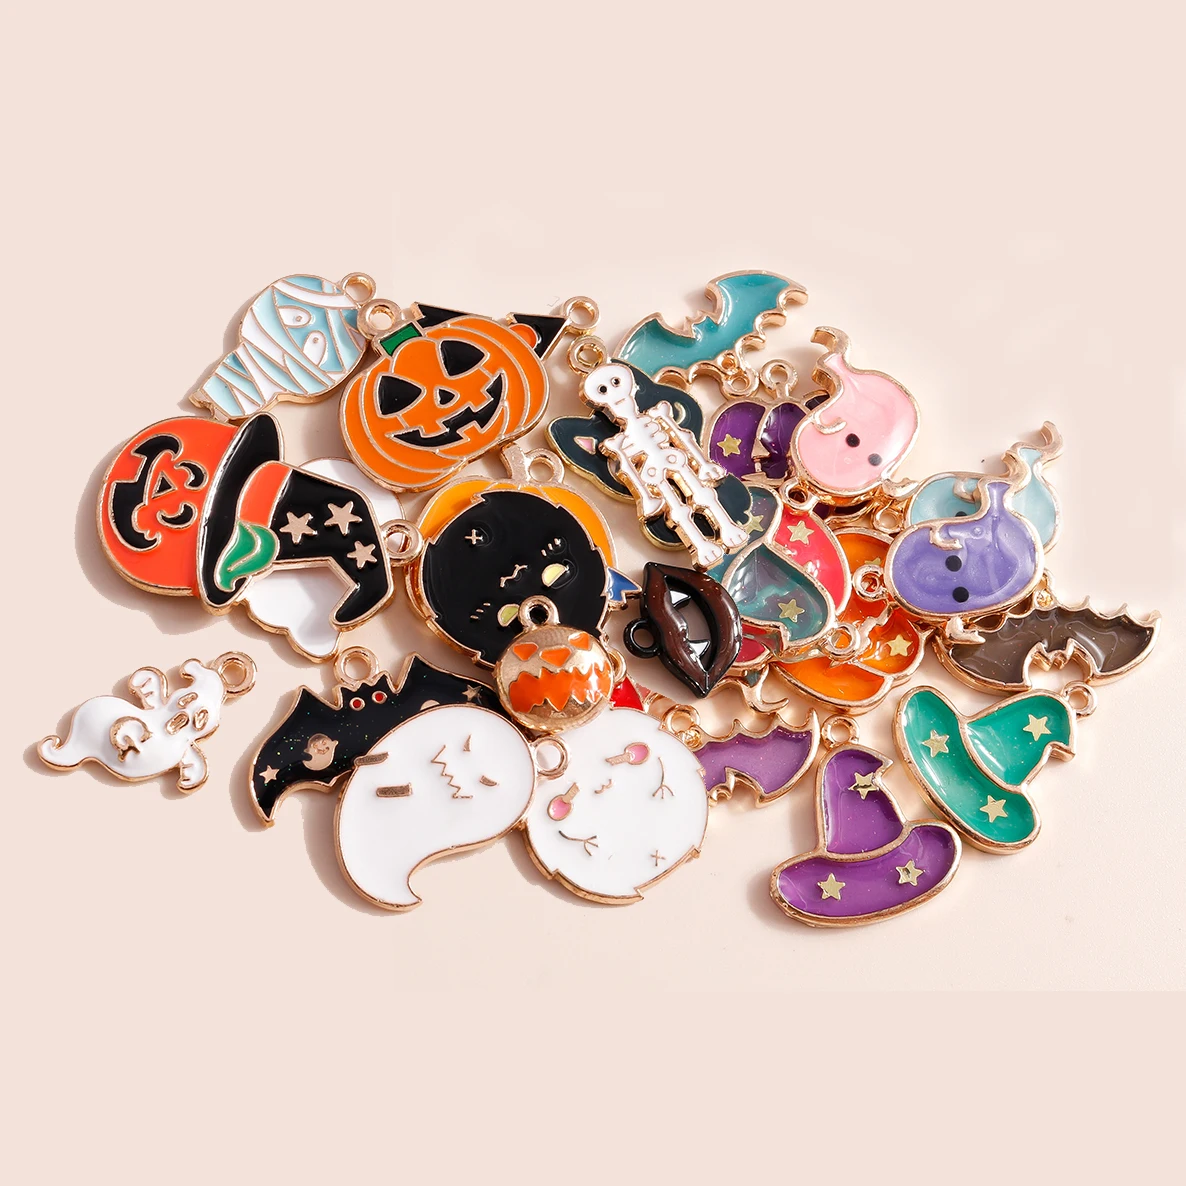 Mix Styles Cartoon Halloween Charms for diy Jewelry Making Accessories Pumpkin Ghost Vampire Bat Evil Pendants Necklaces Earring